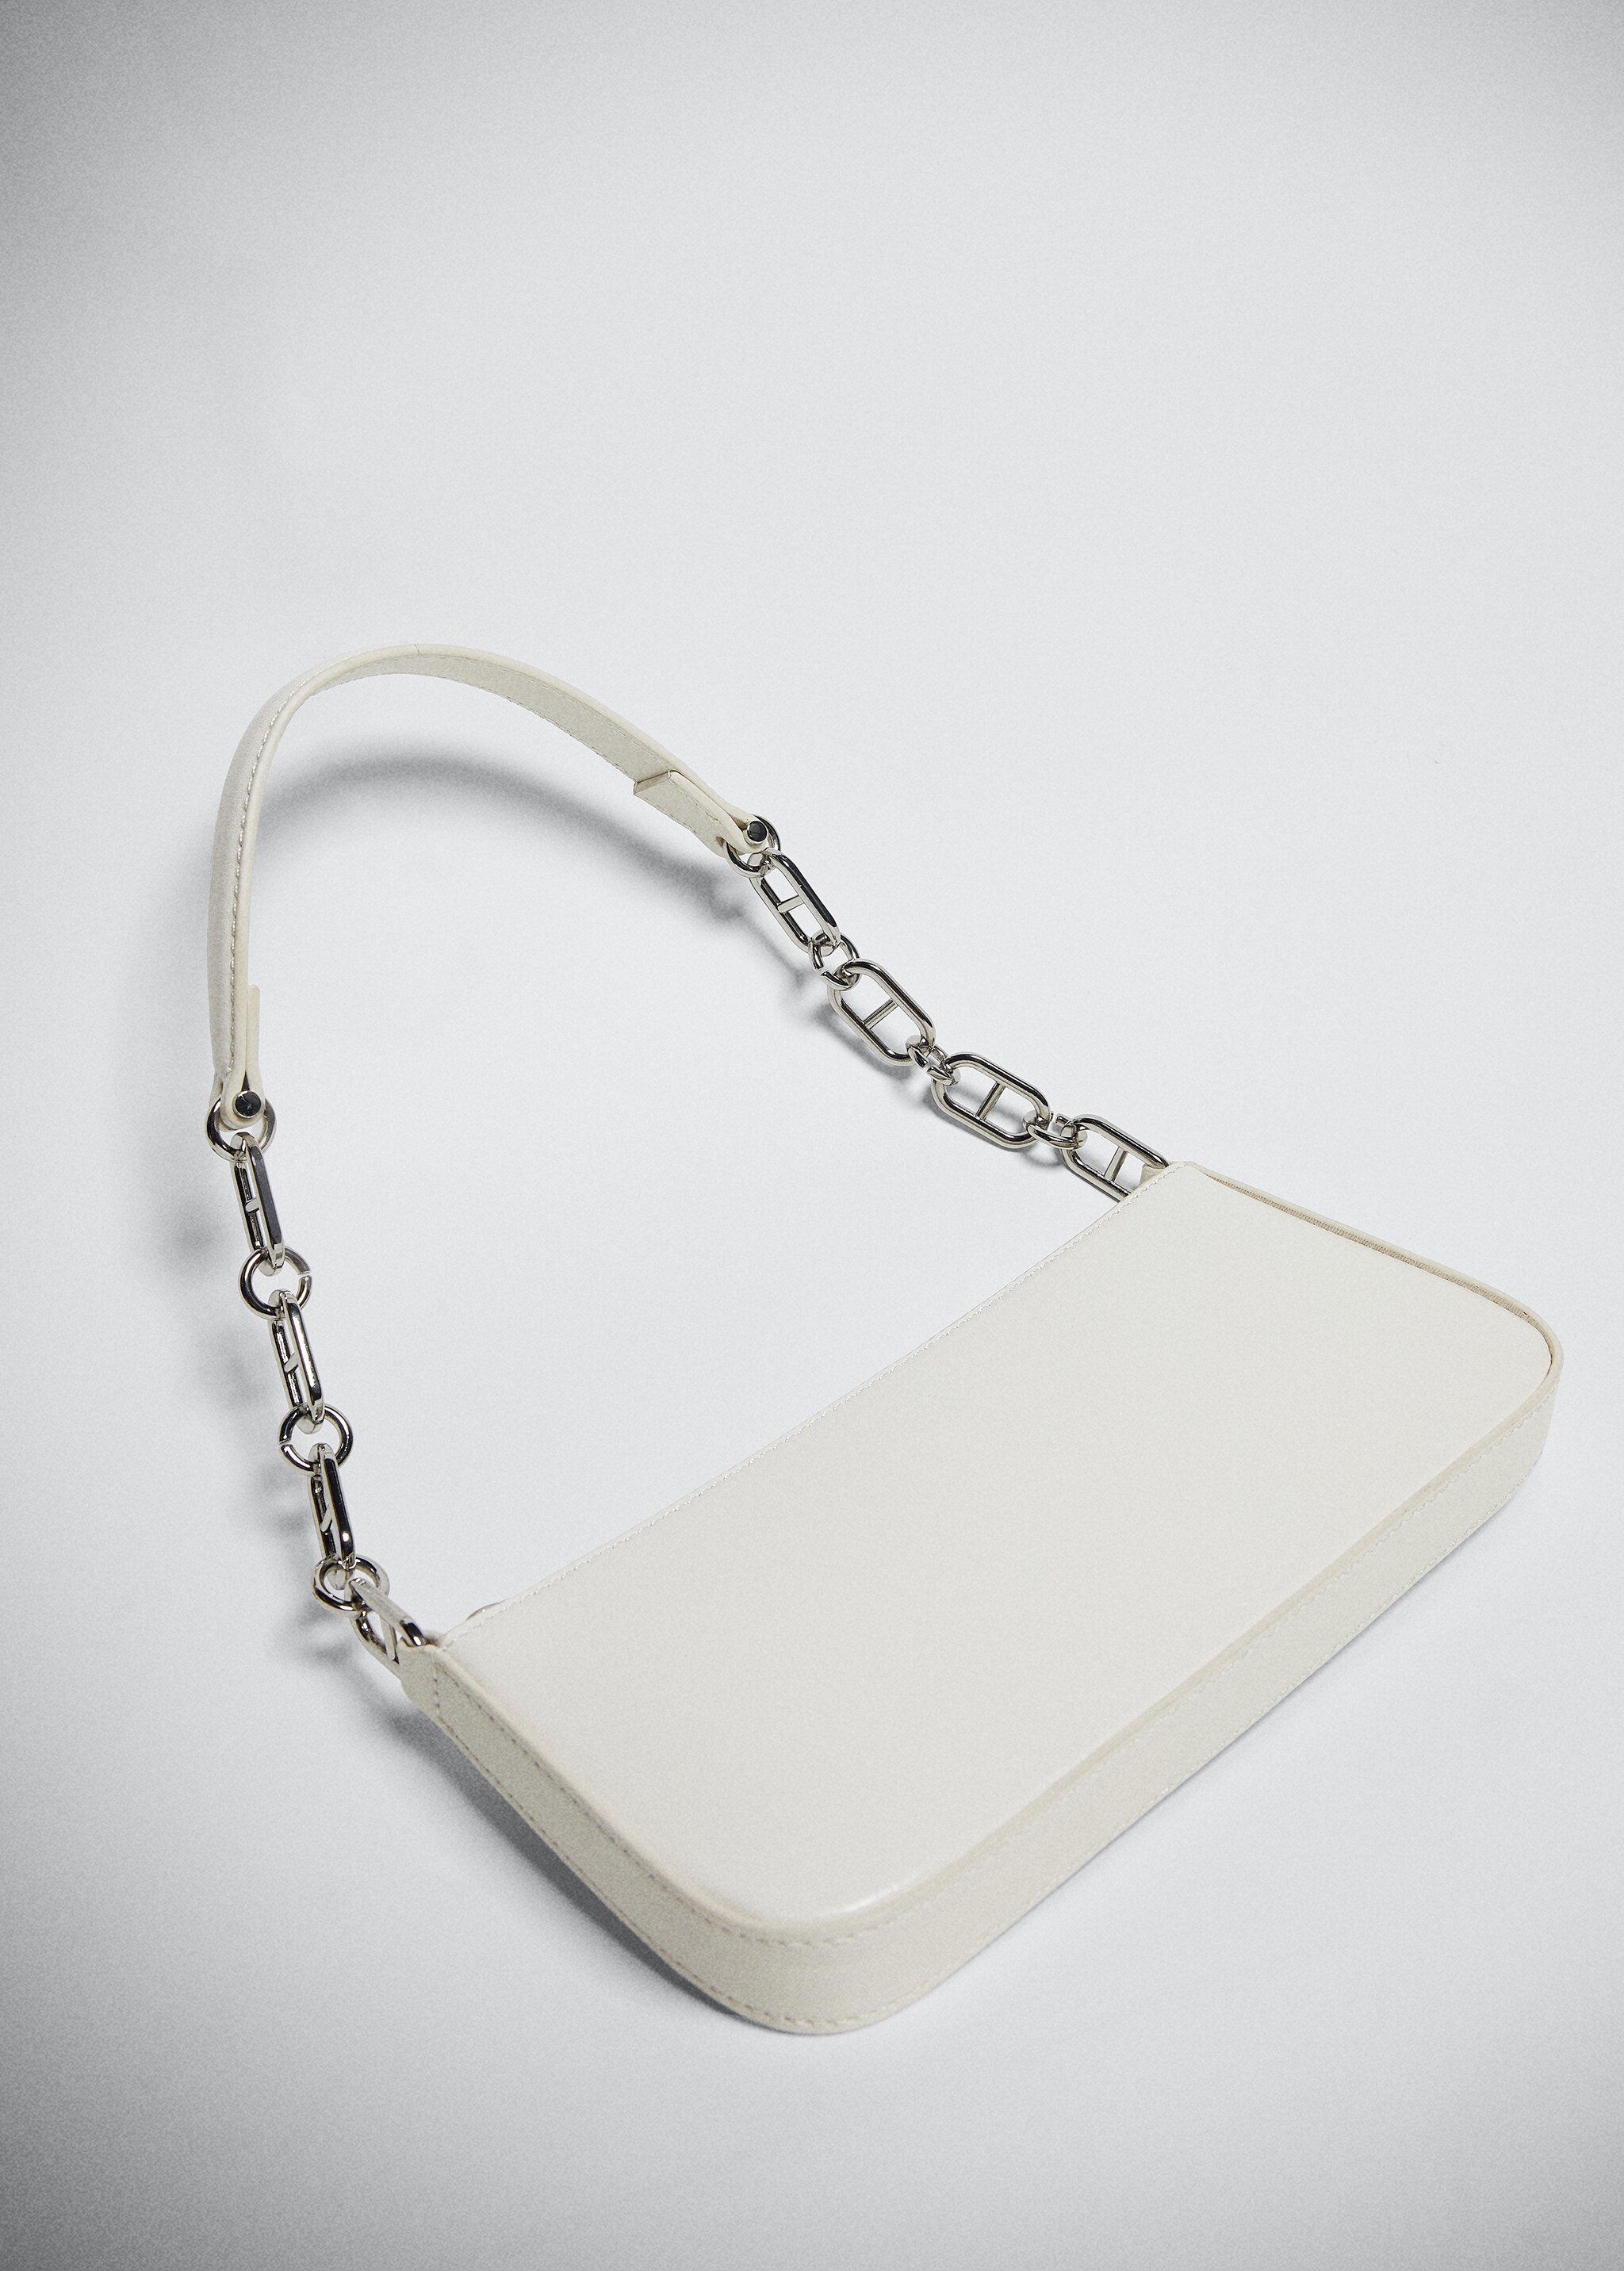 Bag with short chain handle - Details of the article 6